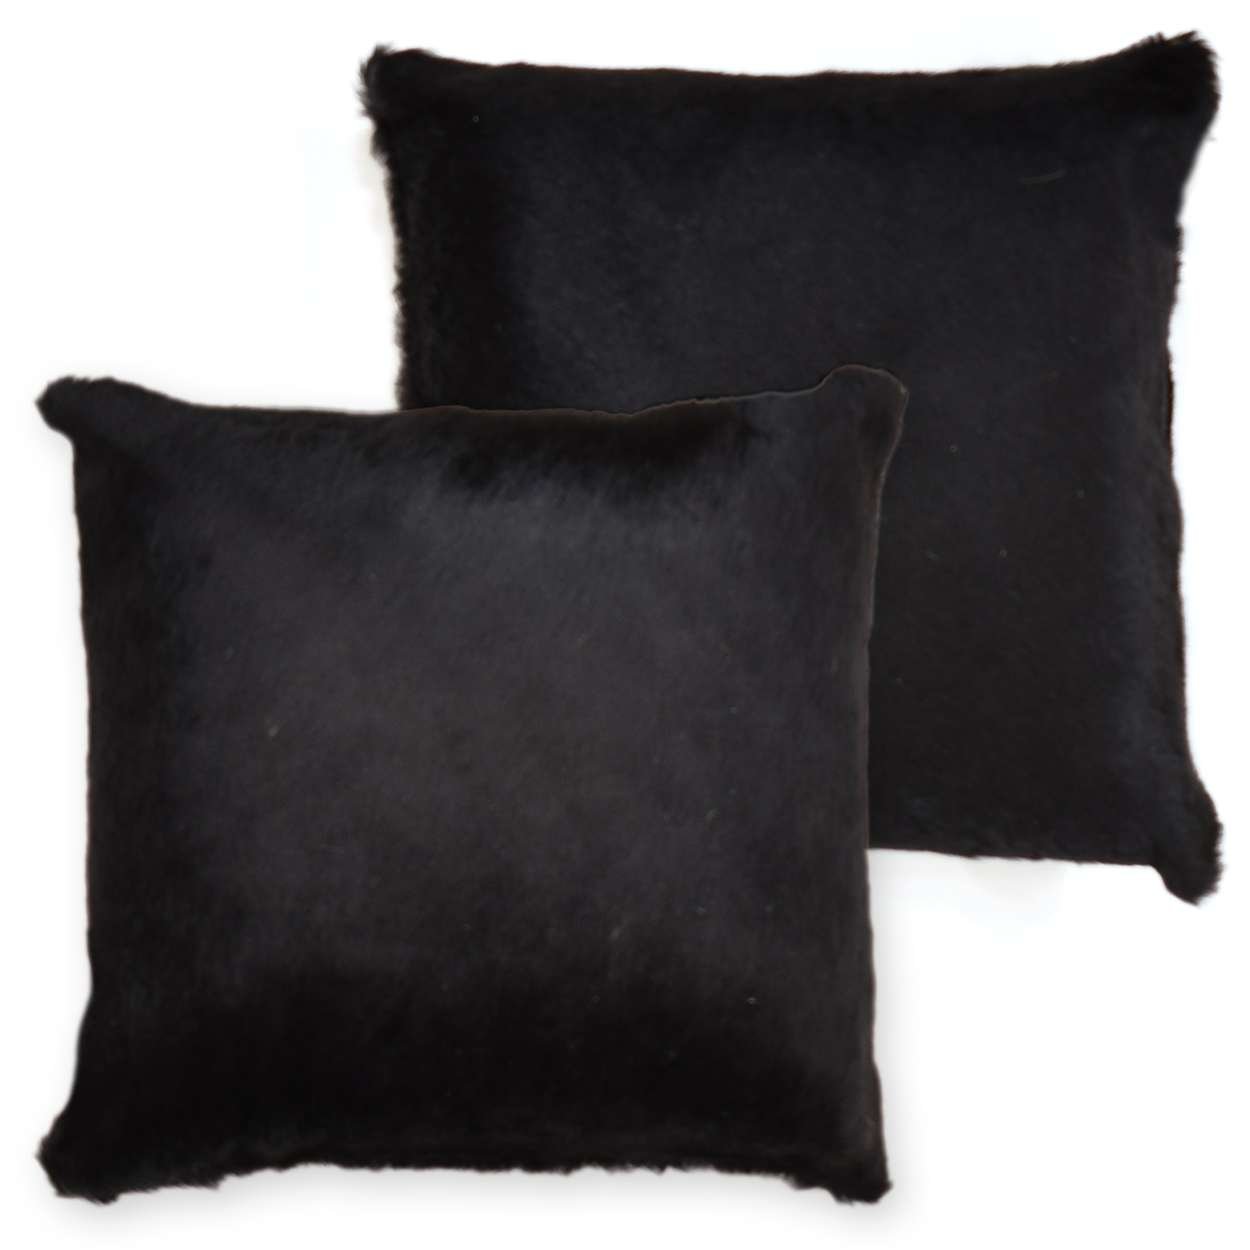 322149 - 15in Premium Cowhide Pillow - Solid Black on Both Sides